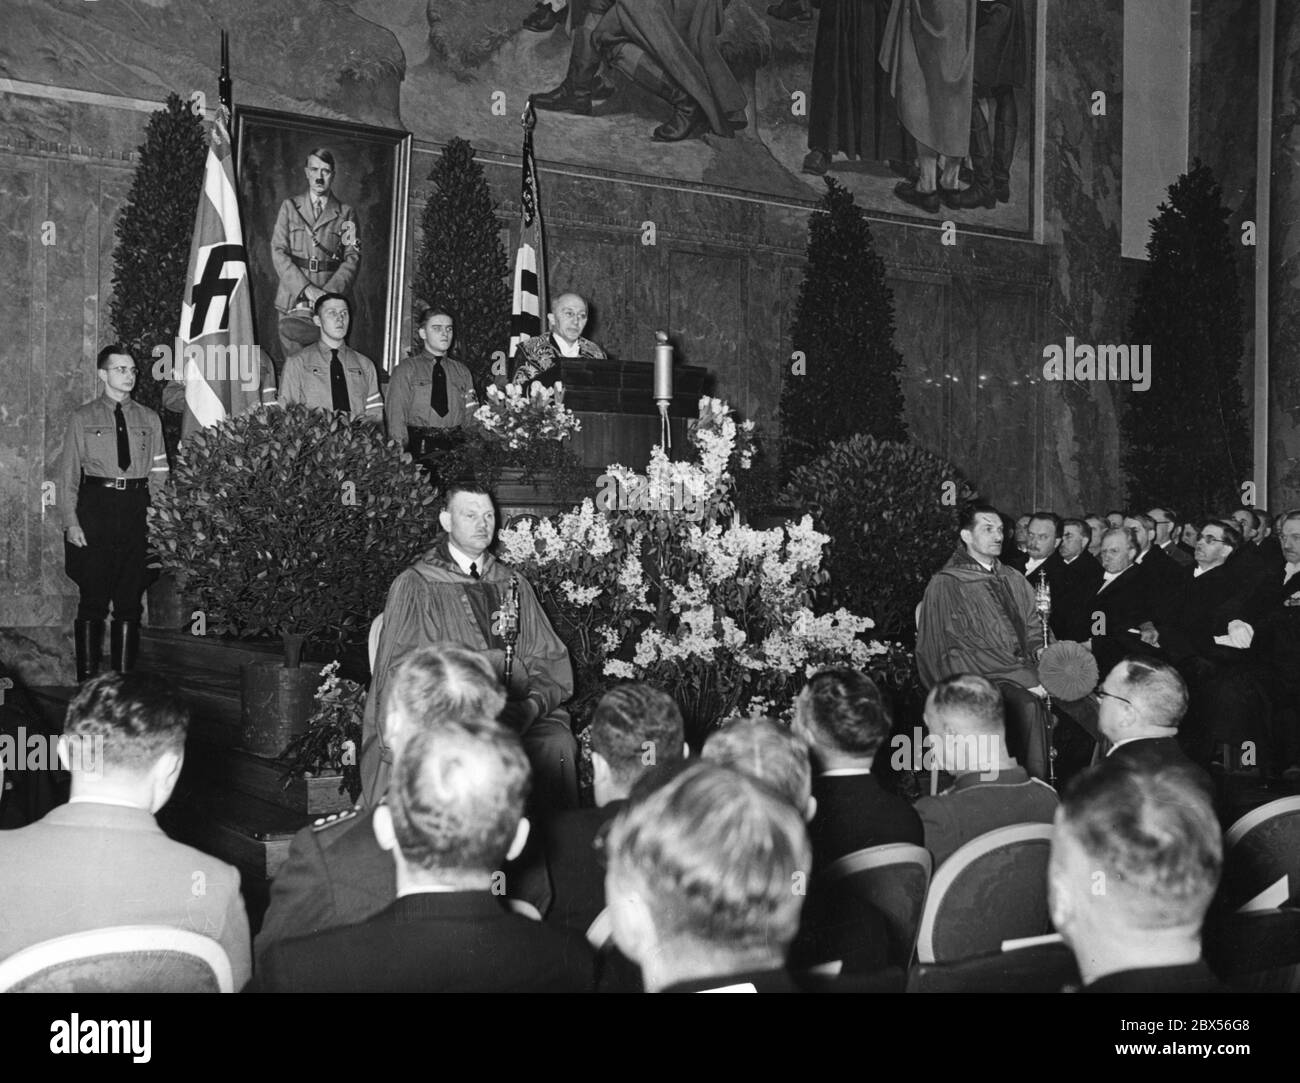 The Rector of the Friedrich-Wilhelms-University Berlin Willy Hoppe (in gown) greets the students at the celebration of the 5th anniversary of the 'Day of National Uprising' in the new auditorium of the university. Behind him is a portrait of Adolf Hitler. On his left is a representative of the NSDStB with flag. Stock Photo